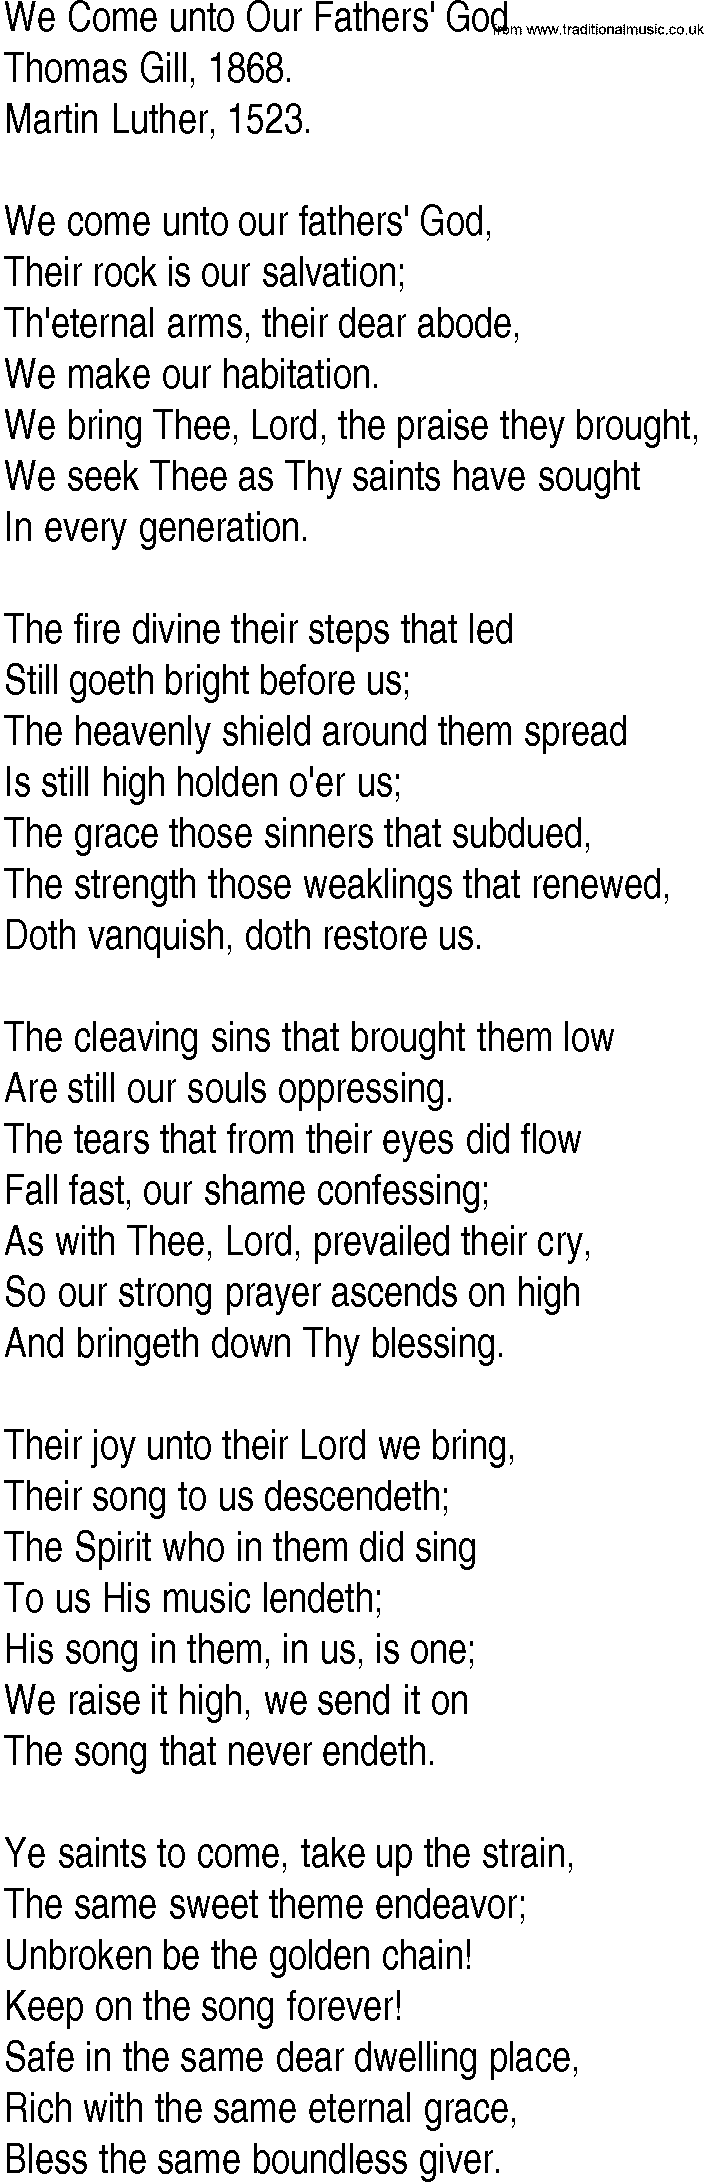 Hymn and Gospel Song: We Come unto Our Fathers' God by Thomas Gill lyrics